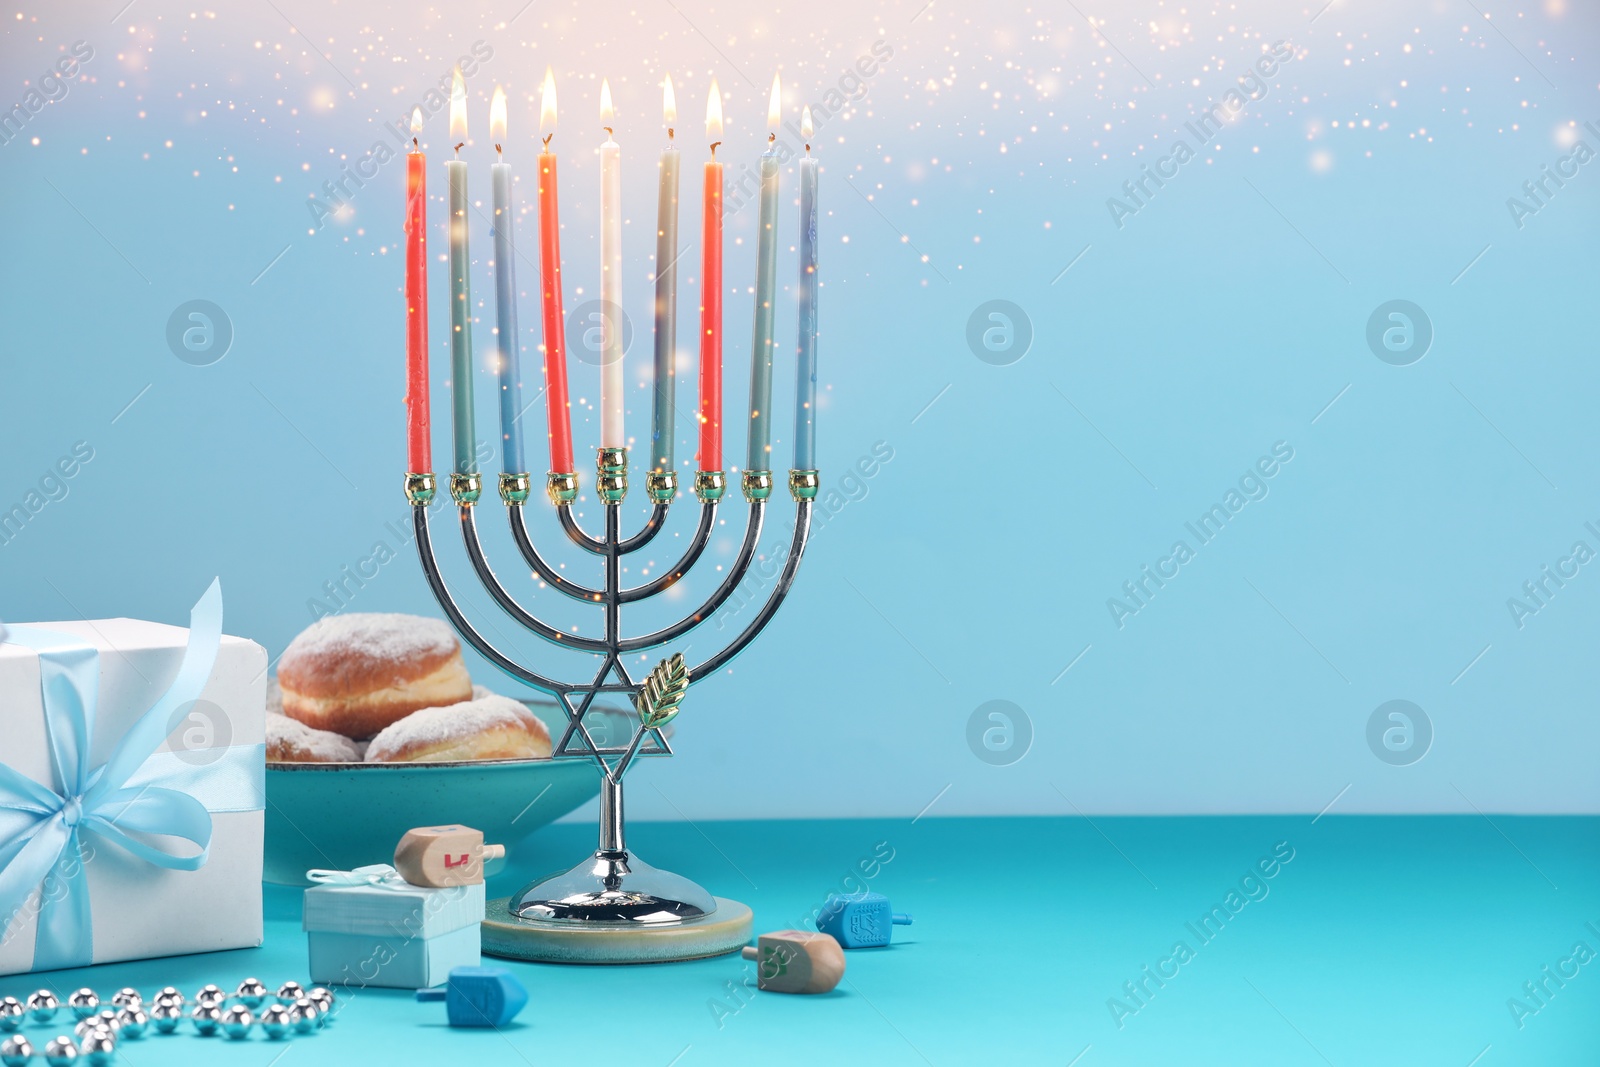 Image of Hanukkah celebration. Menorah with burning candles, dreidels, gift boxes and donuts on light blue table, space for text